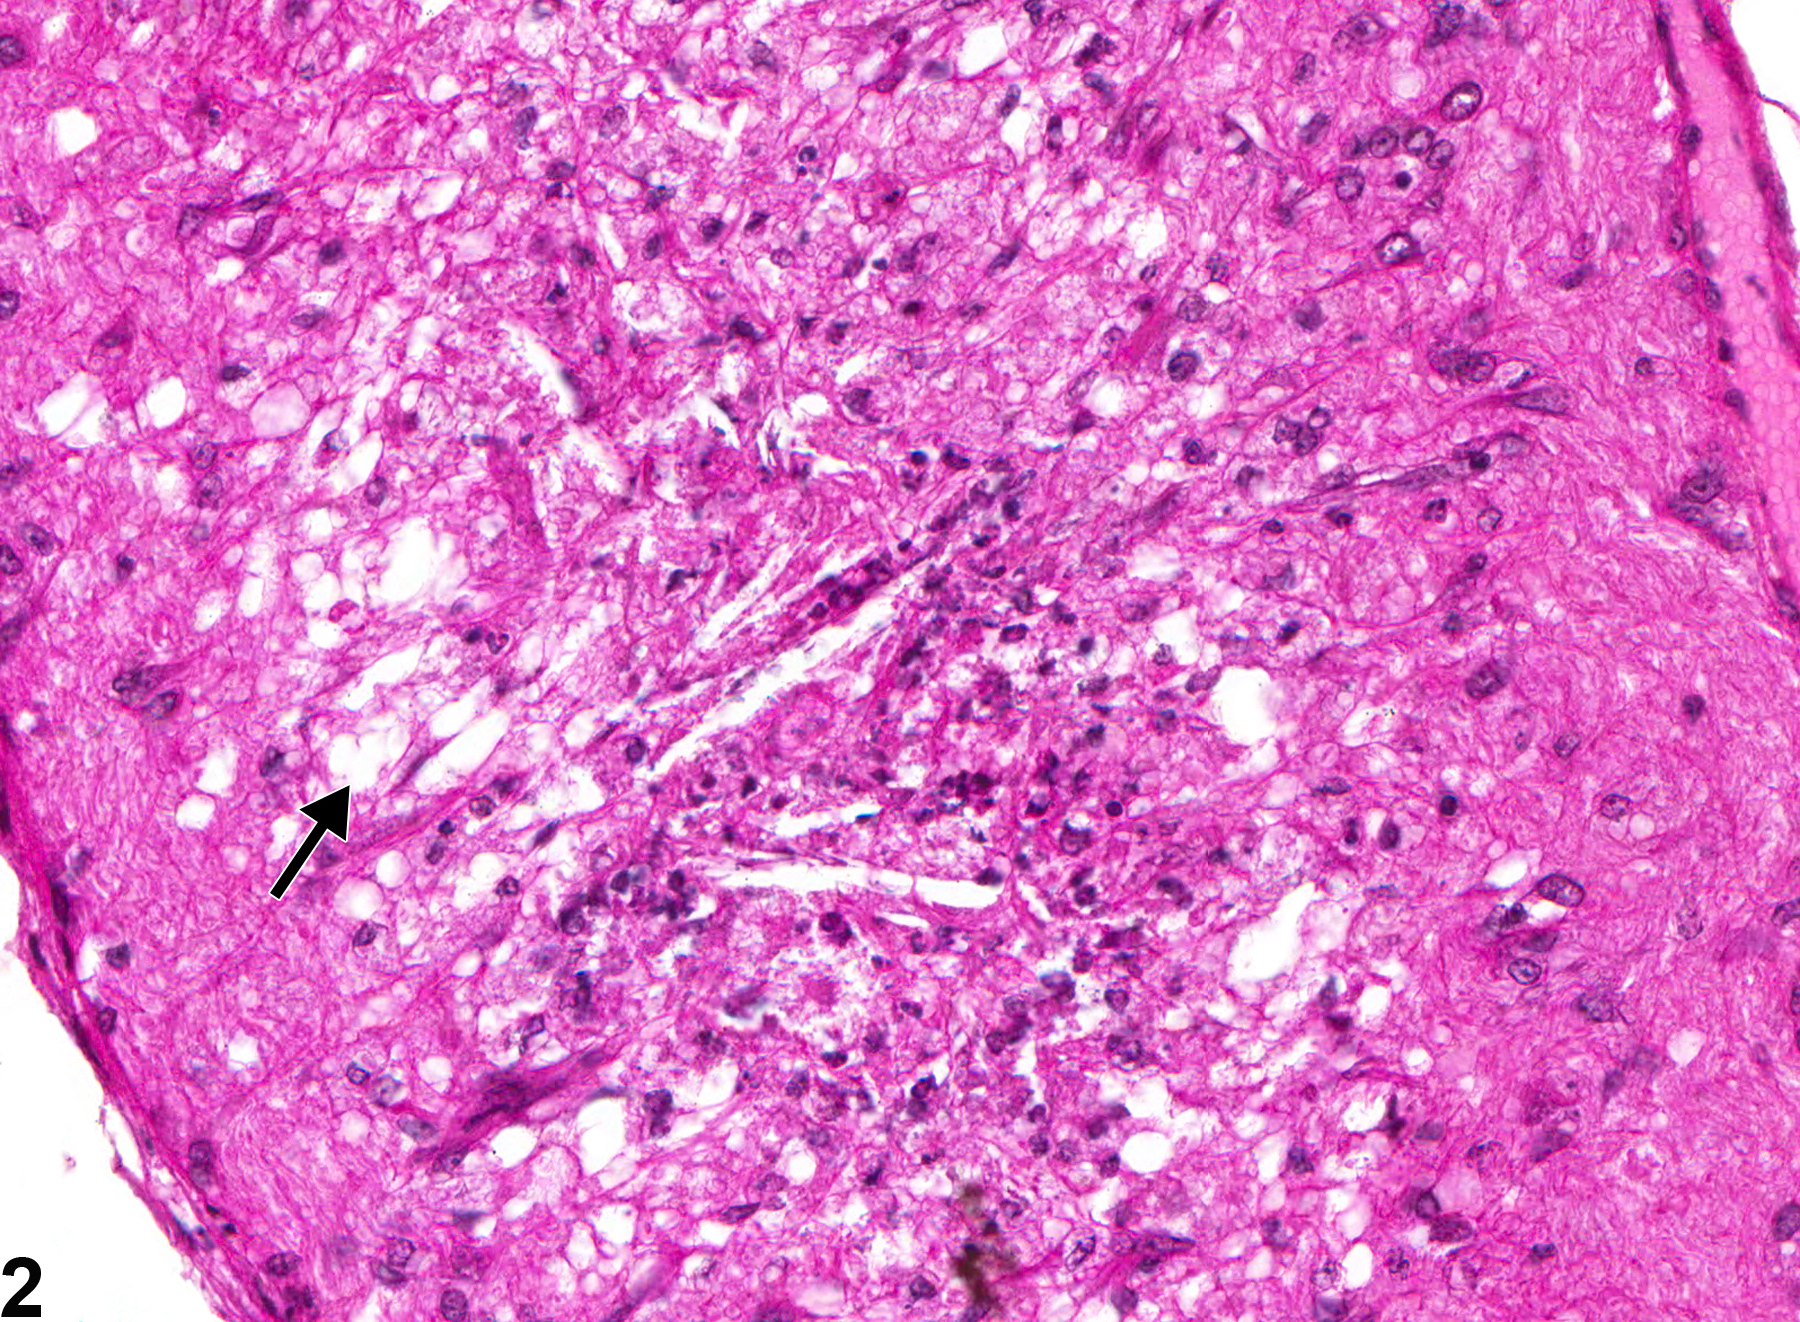 Image of optic nerve degeneration in the eye from a female B6C3F1 mouse in a chronic study